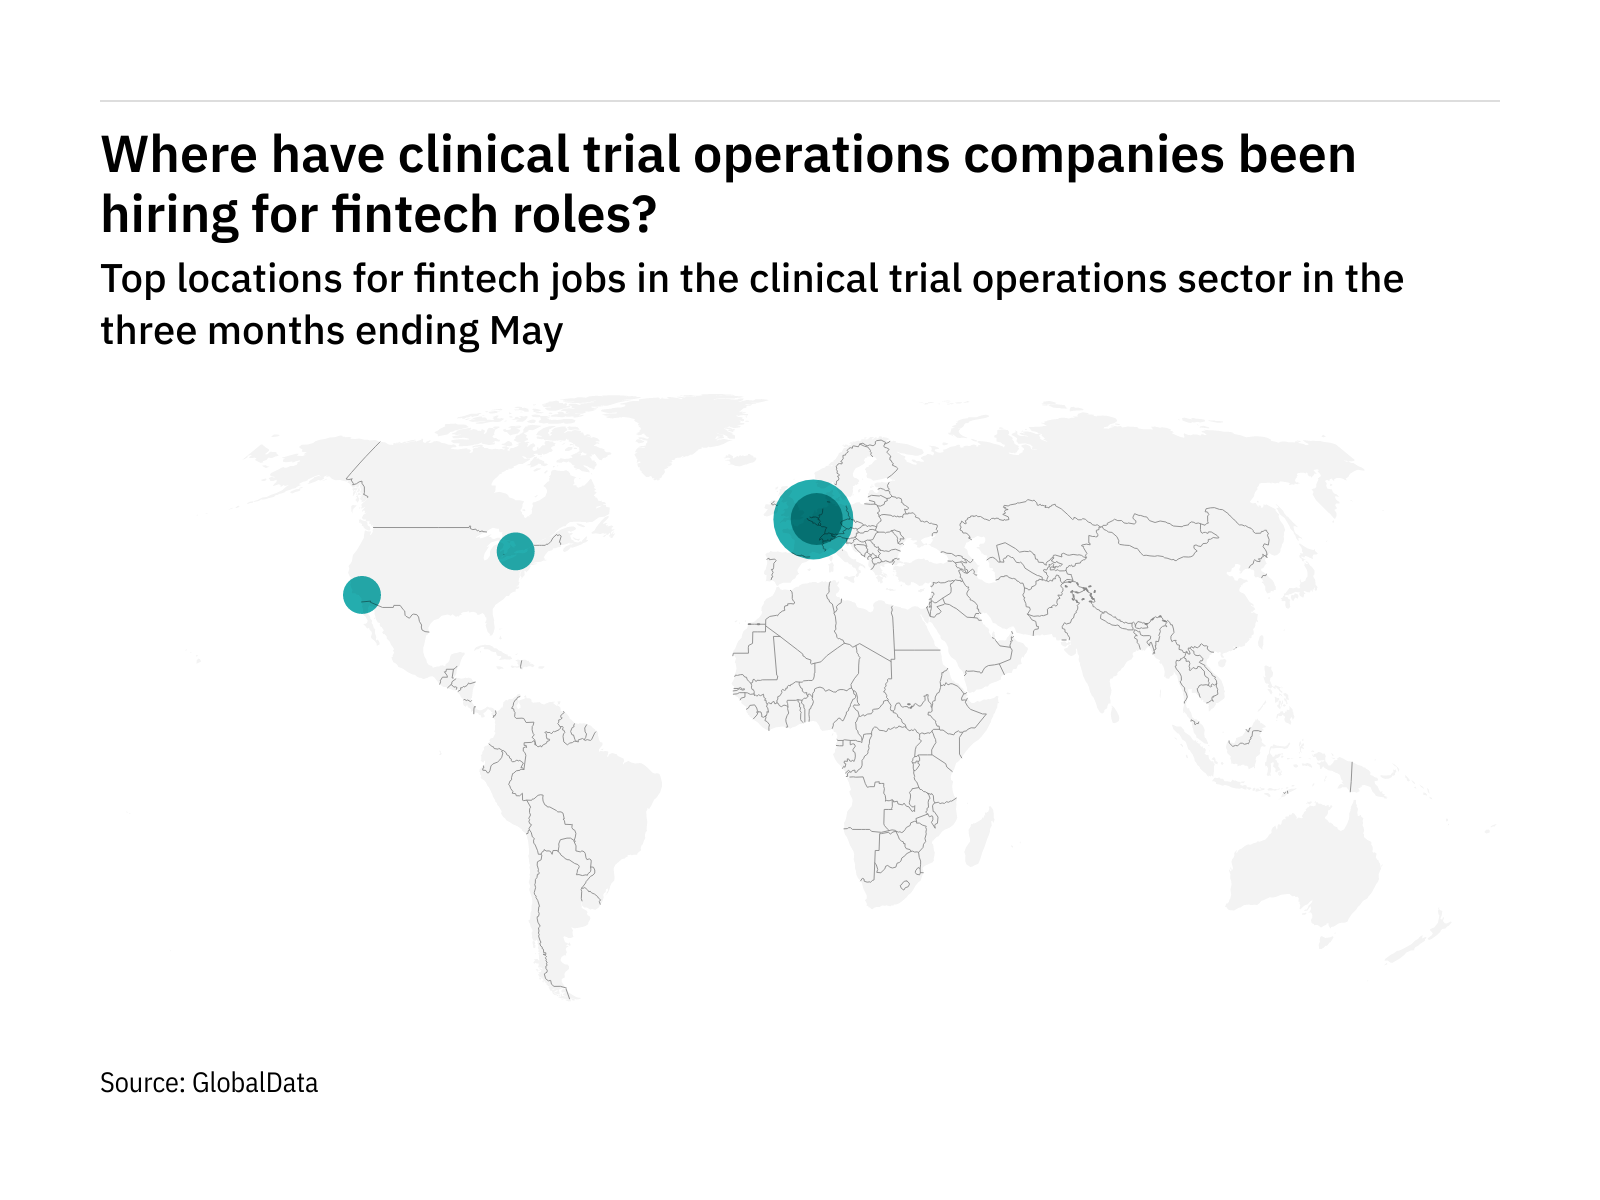 North America sees hiring increase in clinical trial operations fintech roles